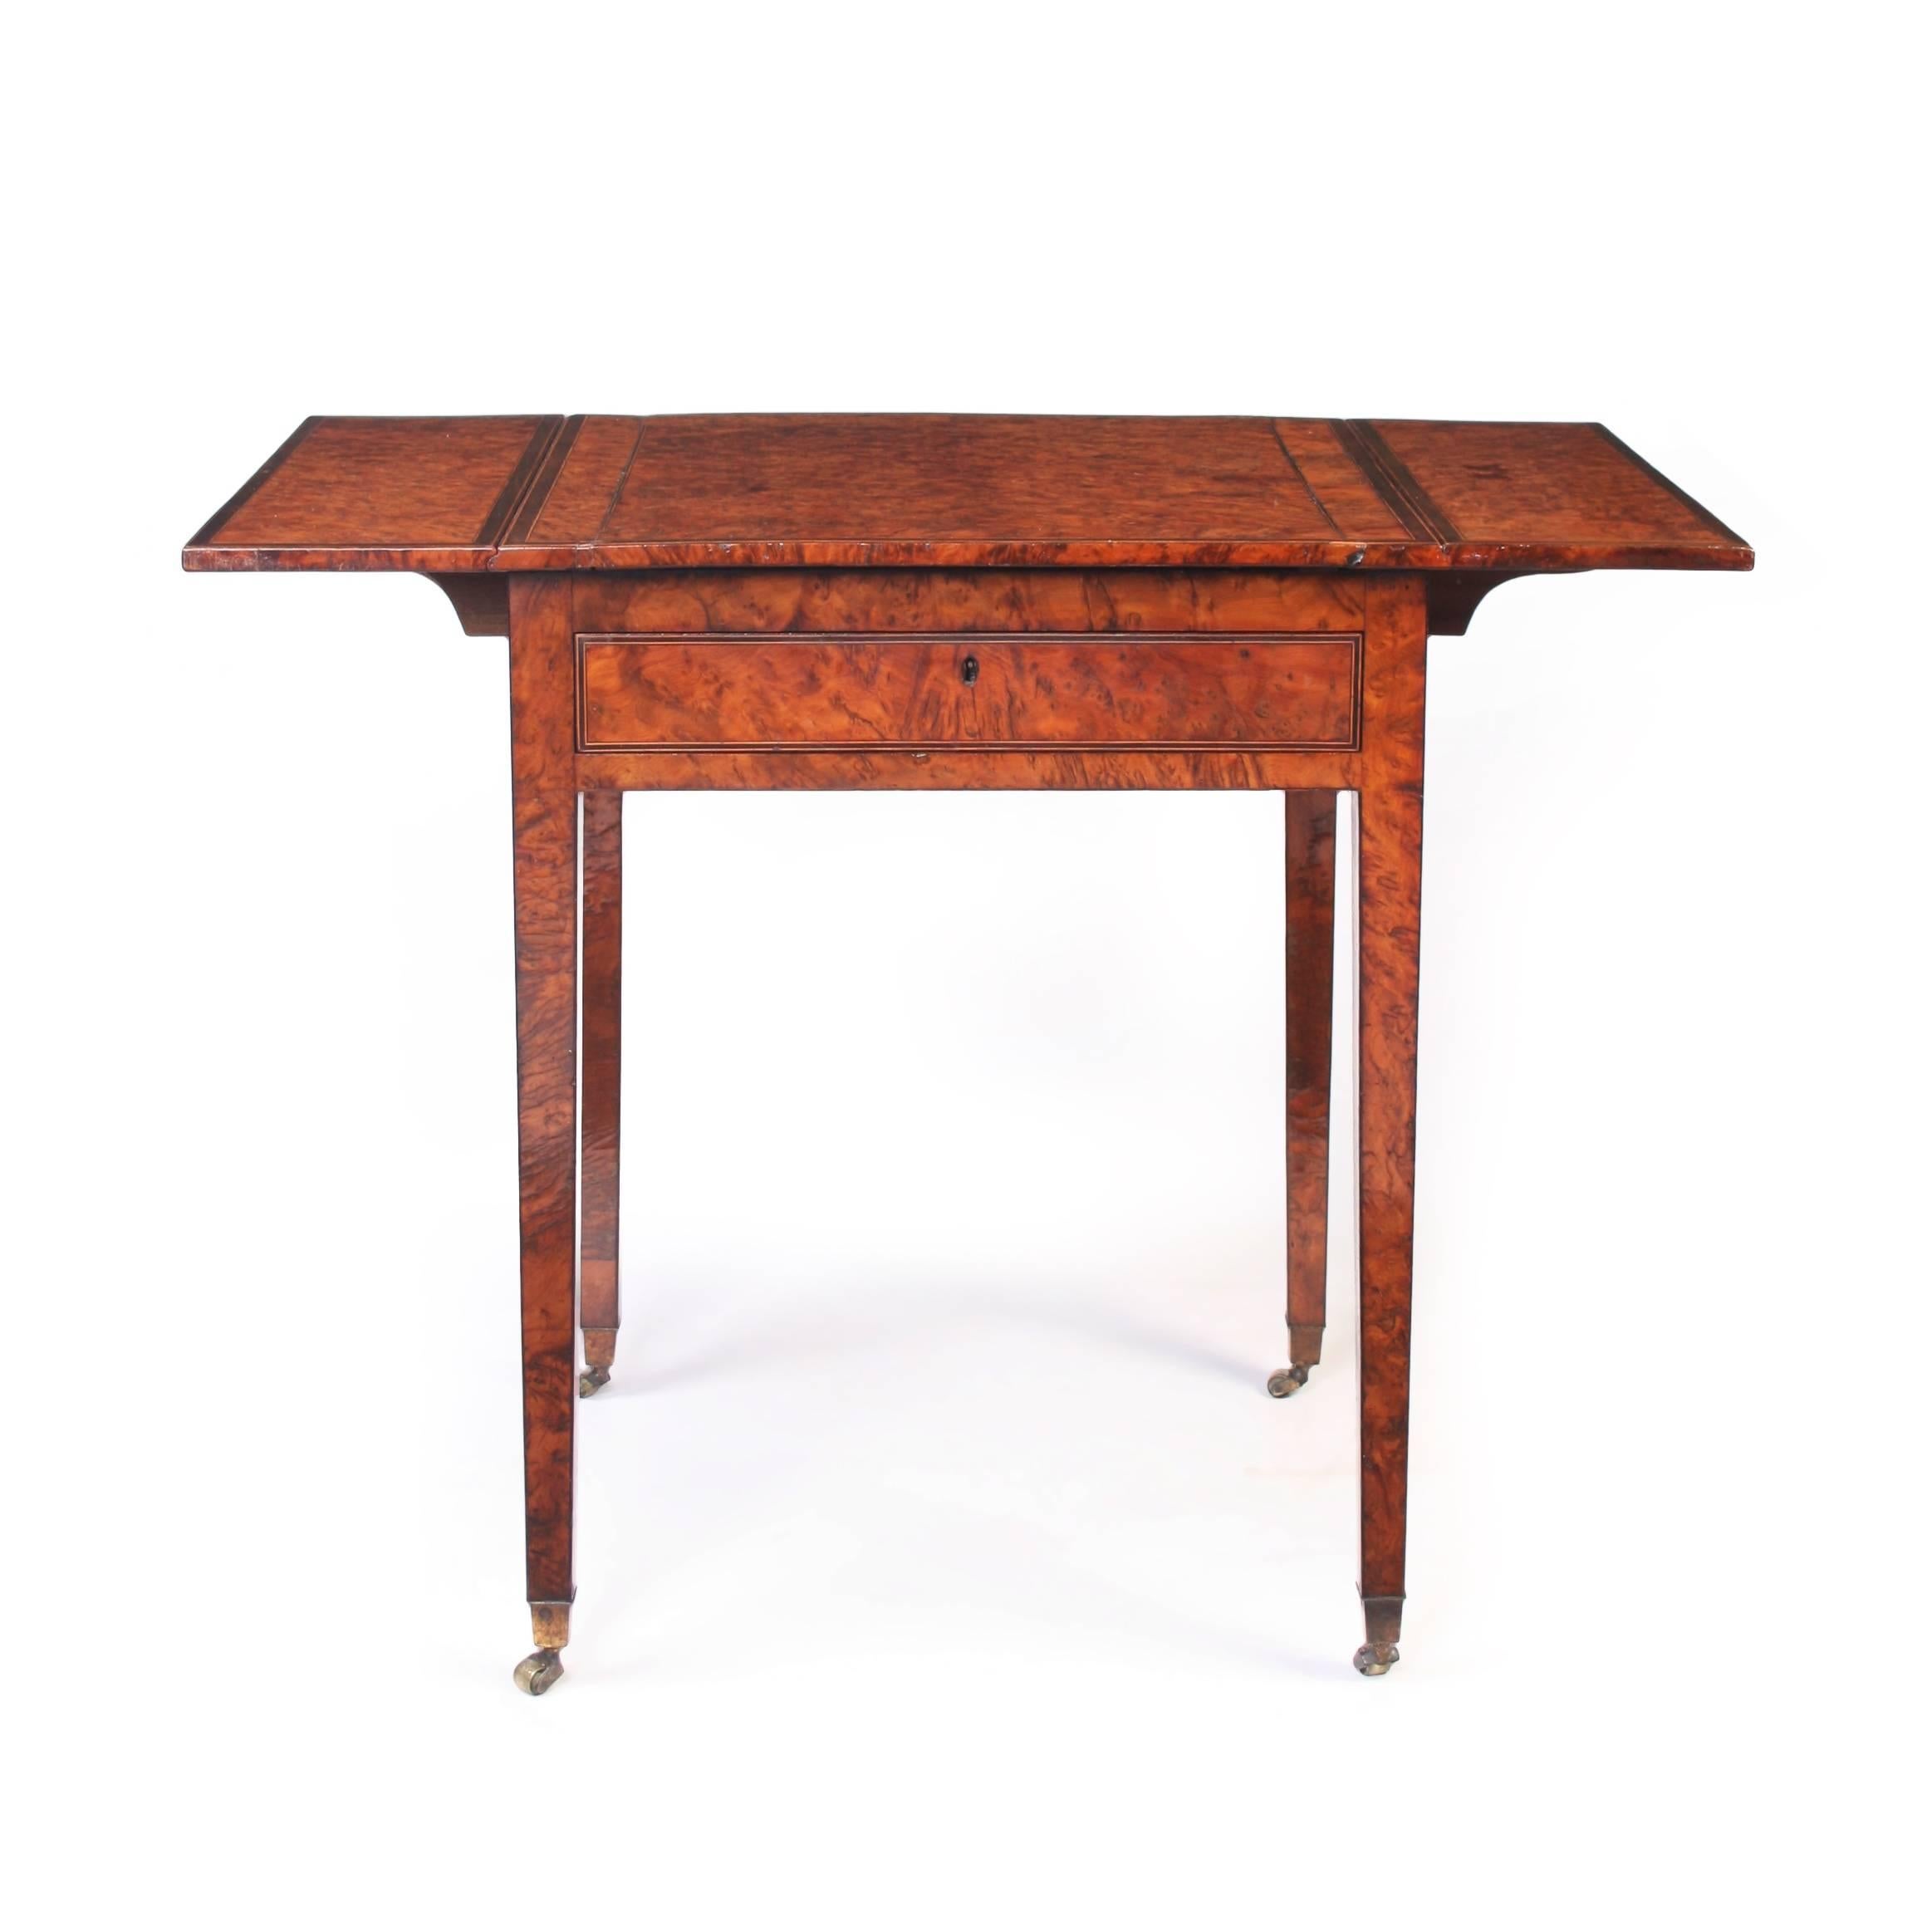 An attractive burr yew wood Pembroke table having a rectangular top cross banded in ebony and lined in boxwood, above a single drawer frieze and raised on square tapering legs and brass bucket castors.